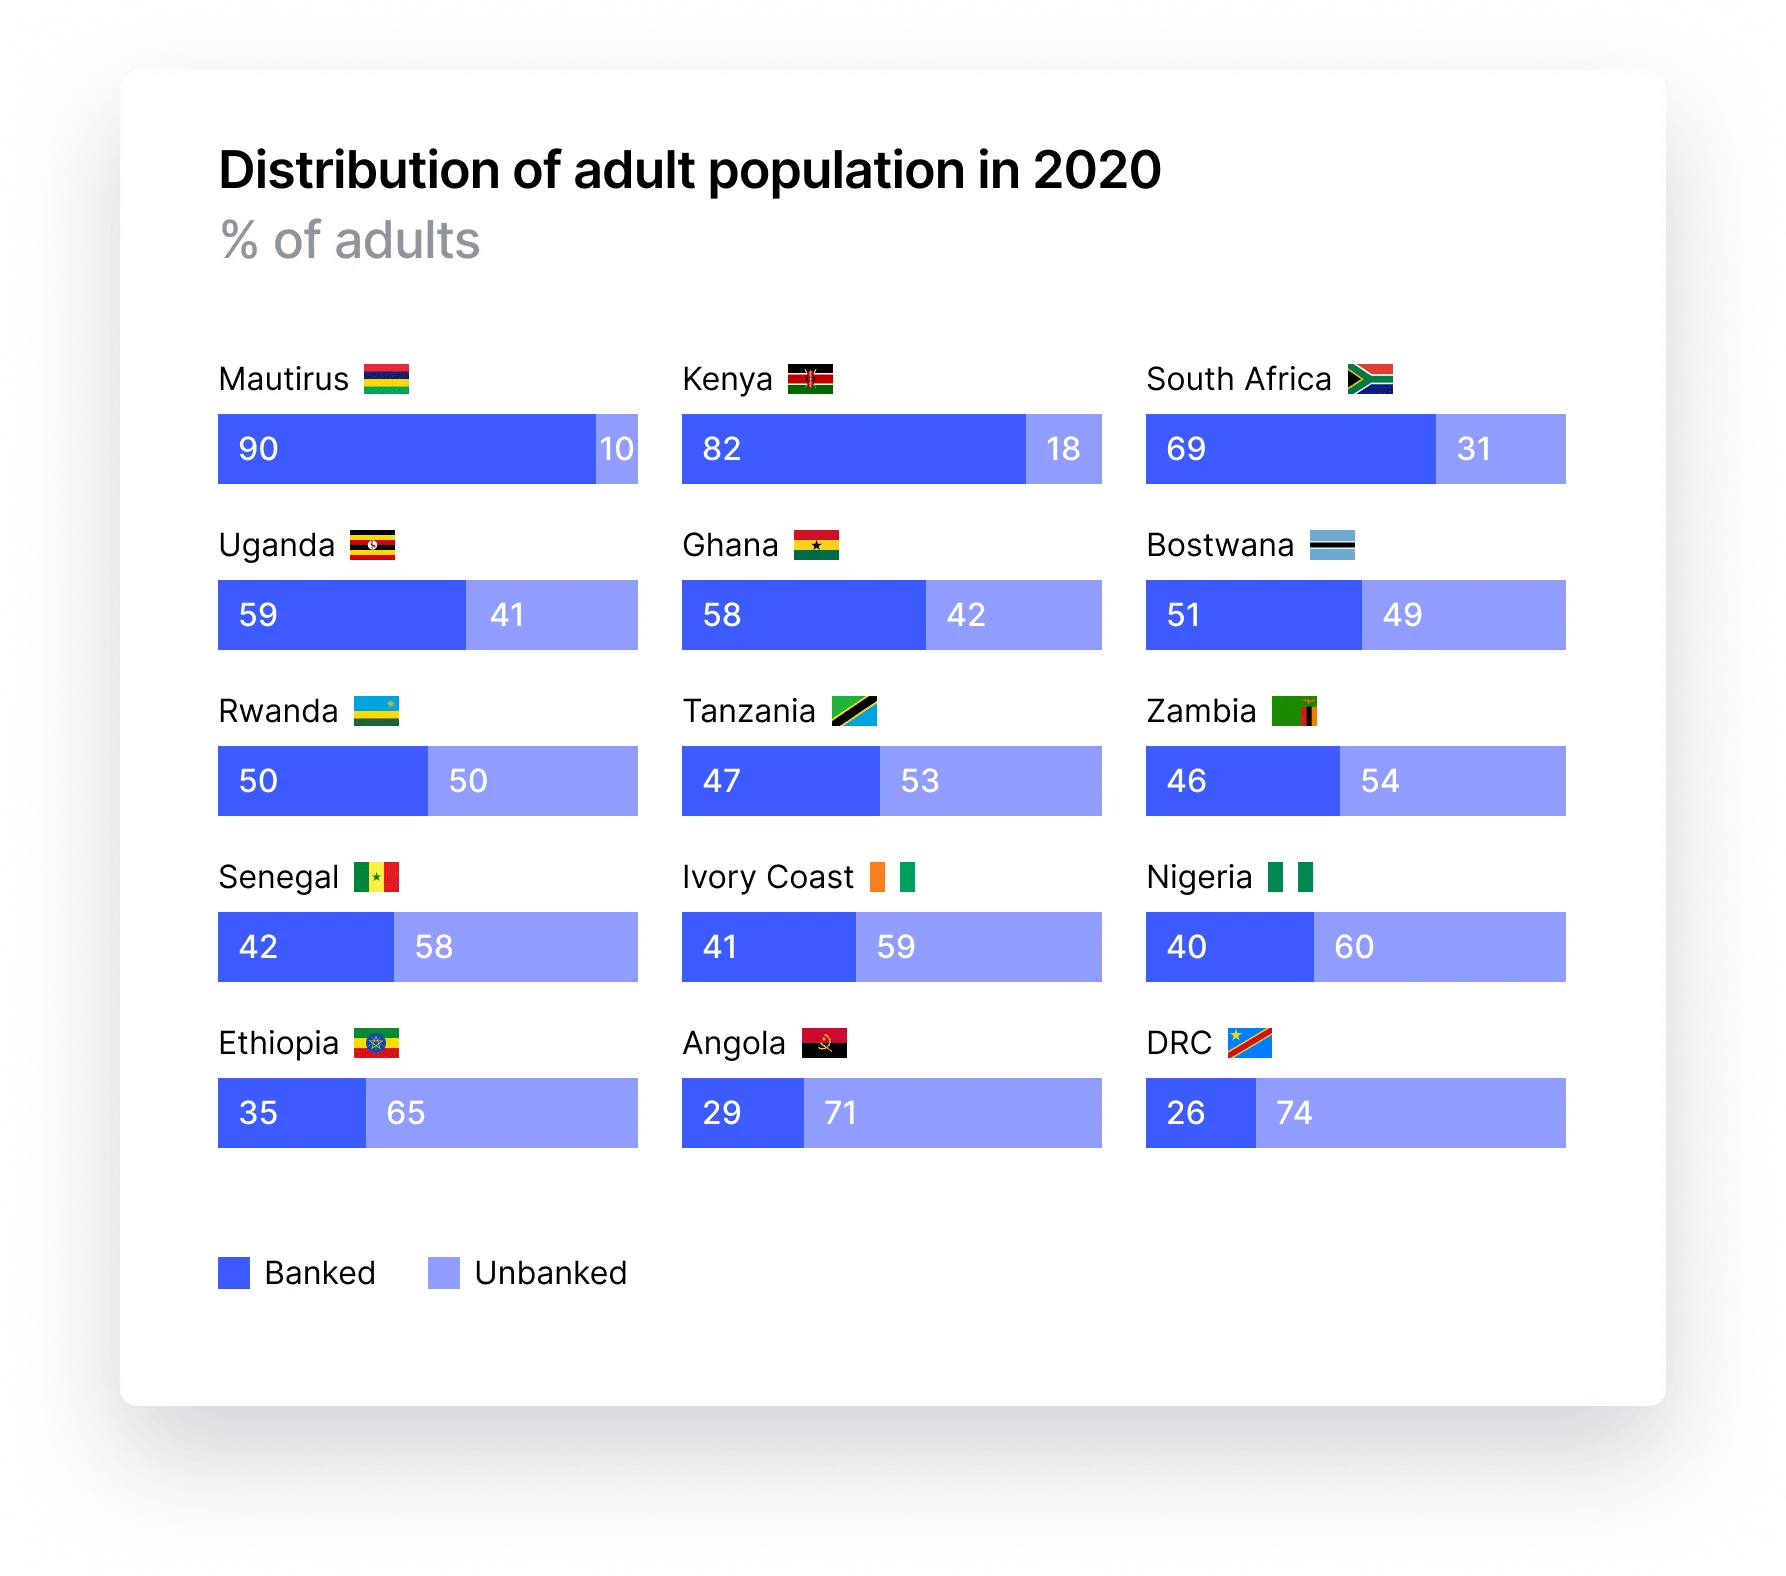 Distribution of Adult Population in 2020